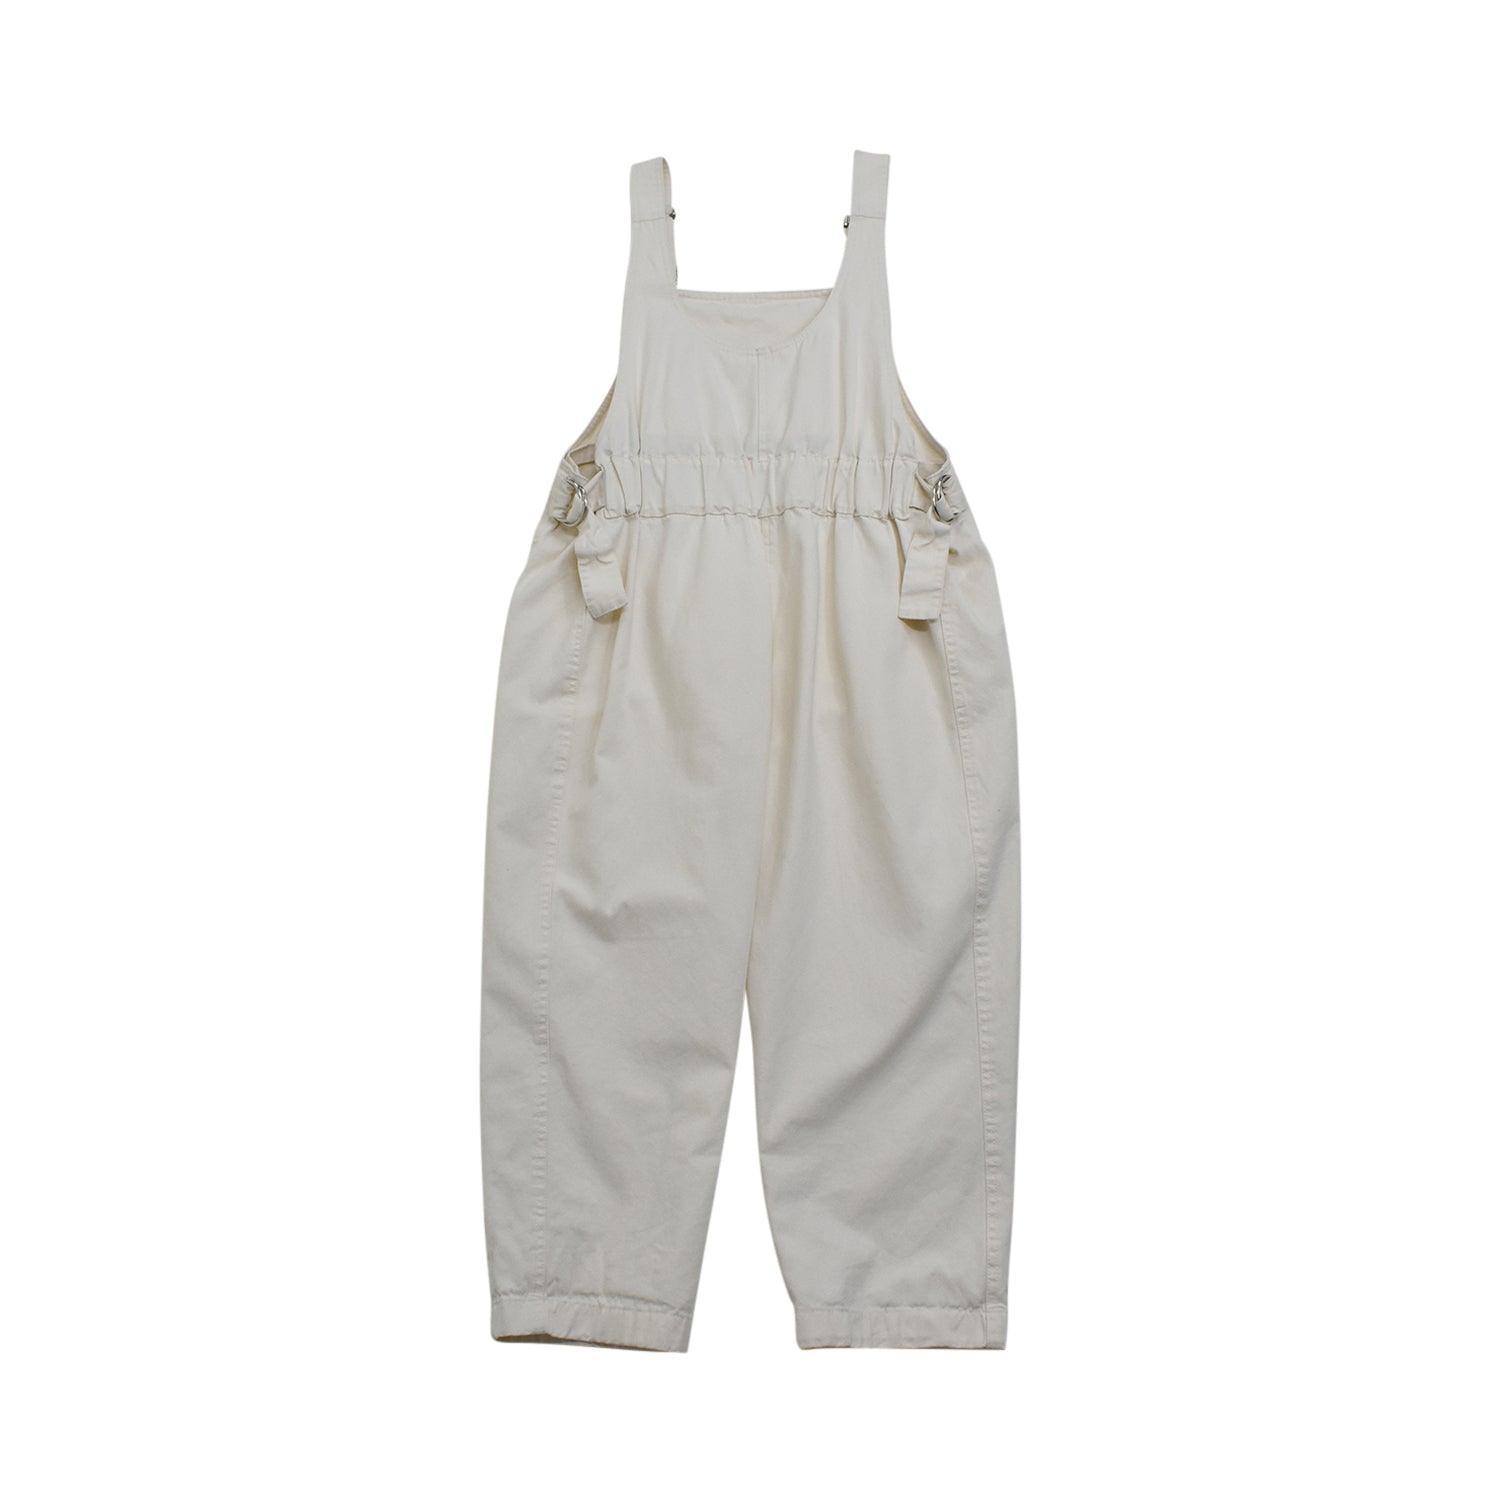 Horses Overalls - Women's 4 - Fashionably Yours